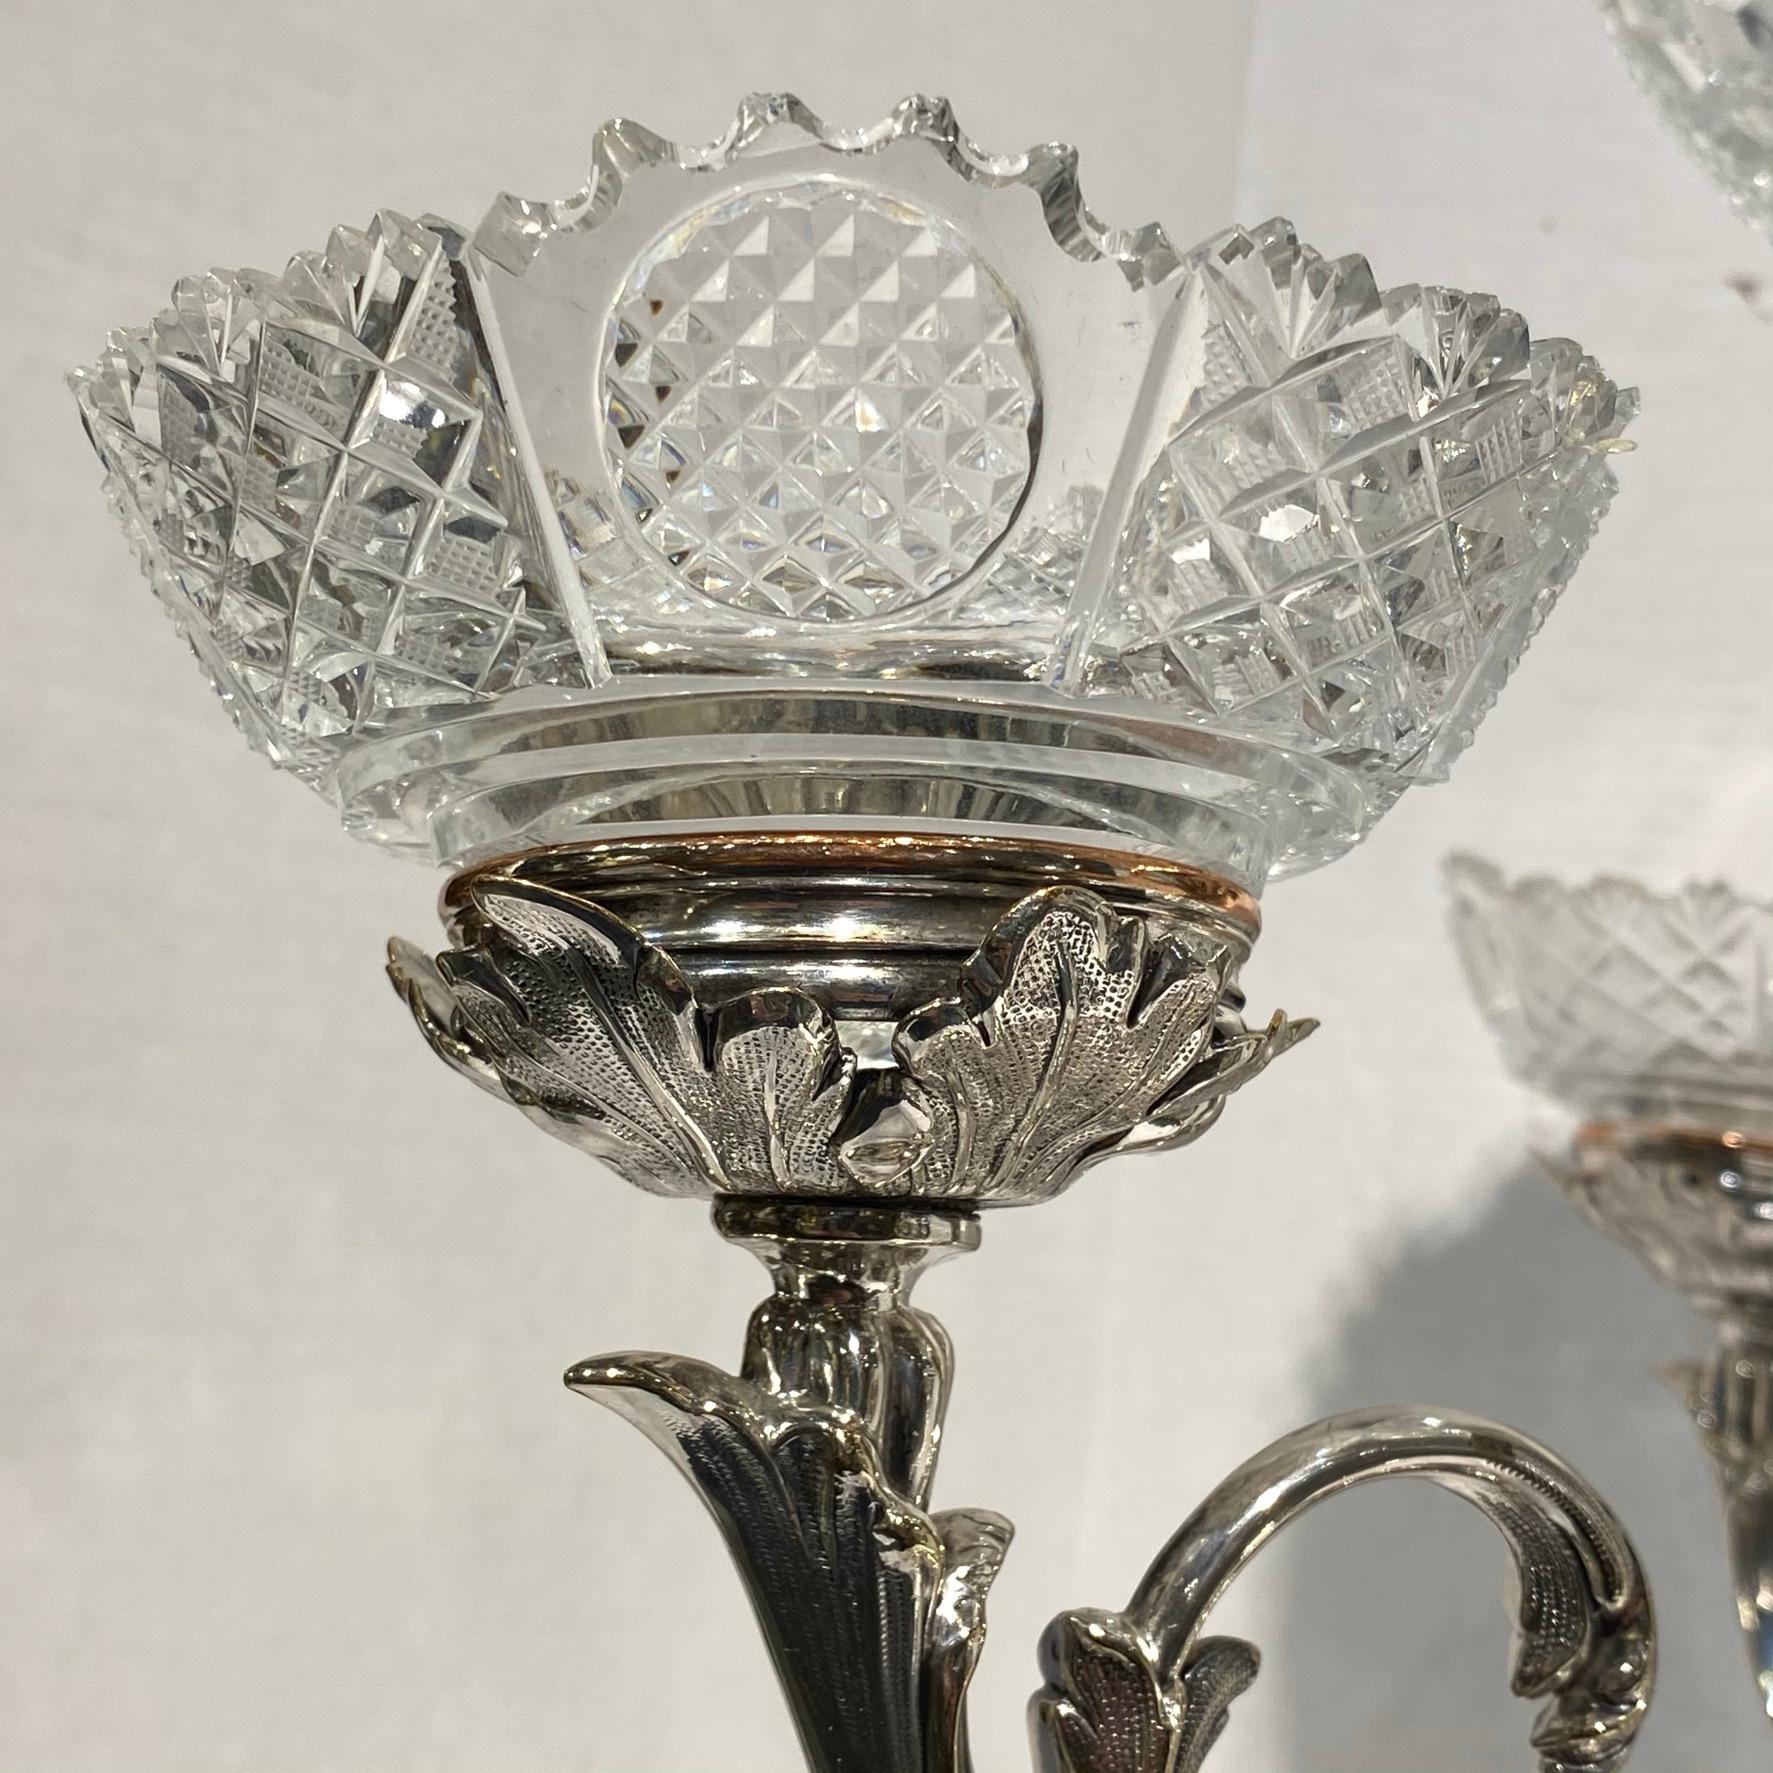 Victorian English 19th Century Silver Plated and Cut-Glass Epergne